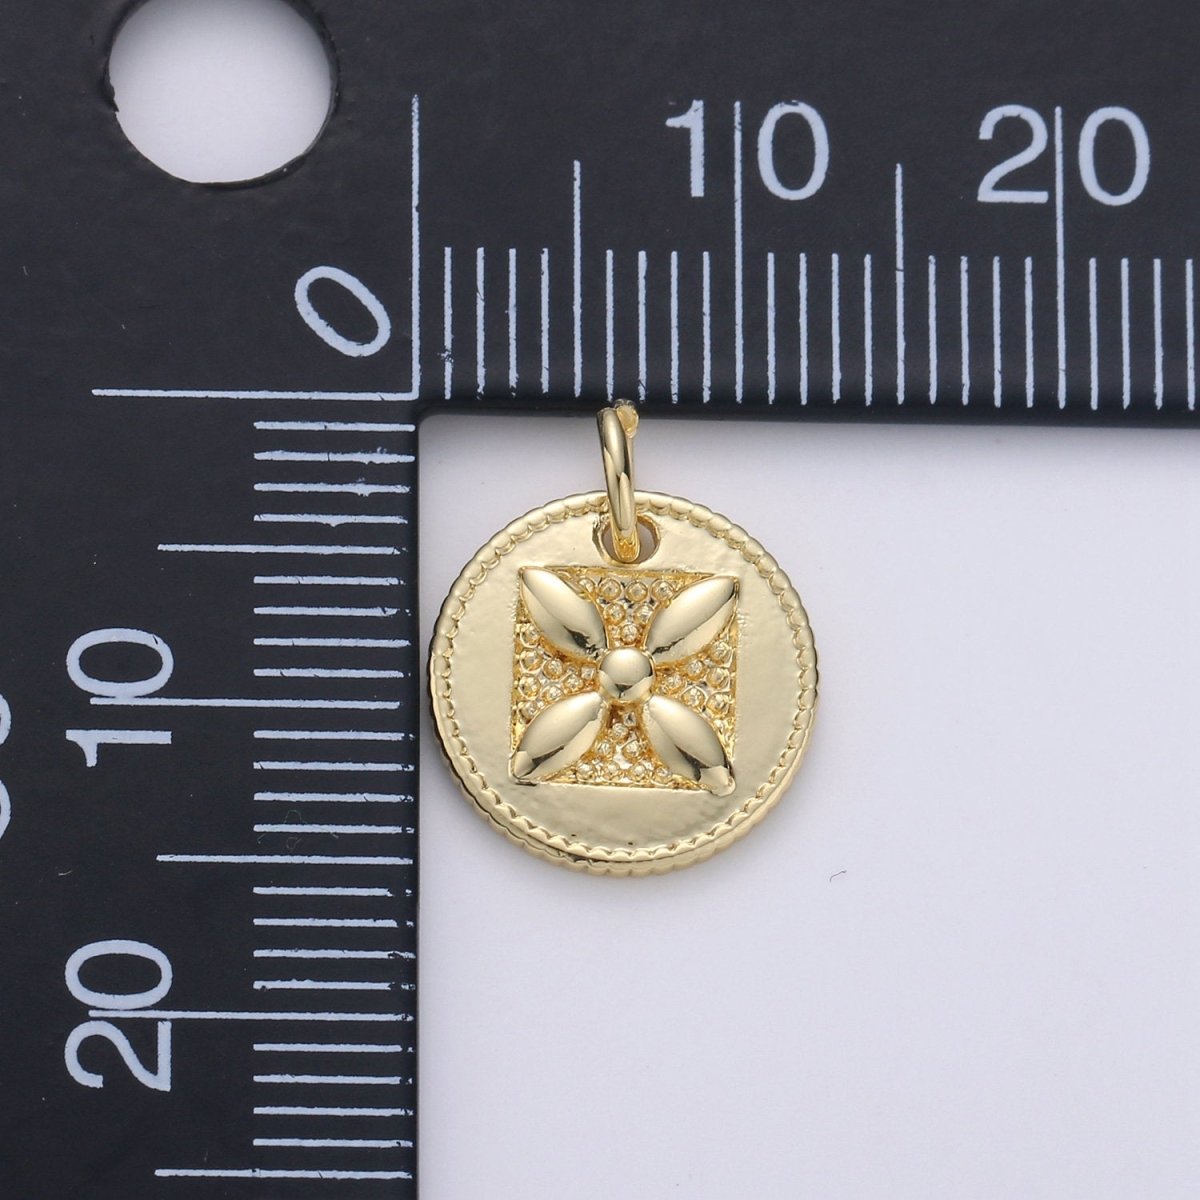 Dainty Tiny Small Flower Charm Monogram Pendant Gold Four leaf petal charm for DIY Jewelry Making 24k Gold Filled Findings D-544 - DLUXCA